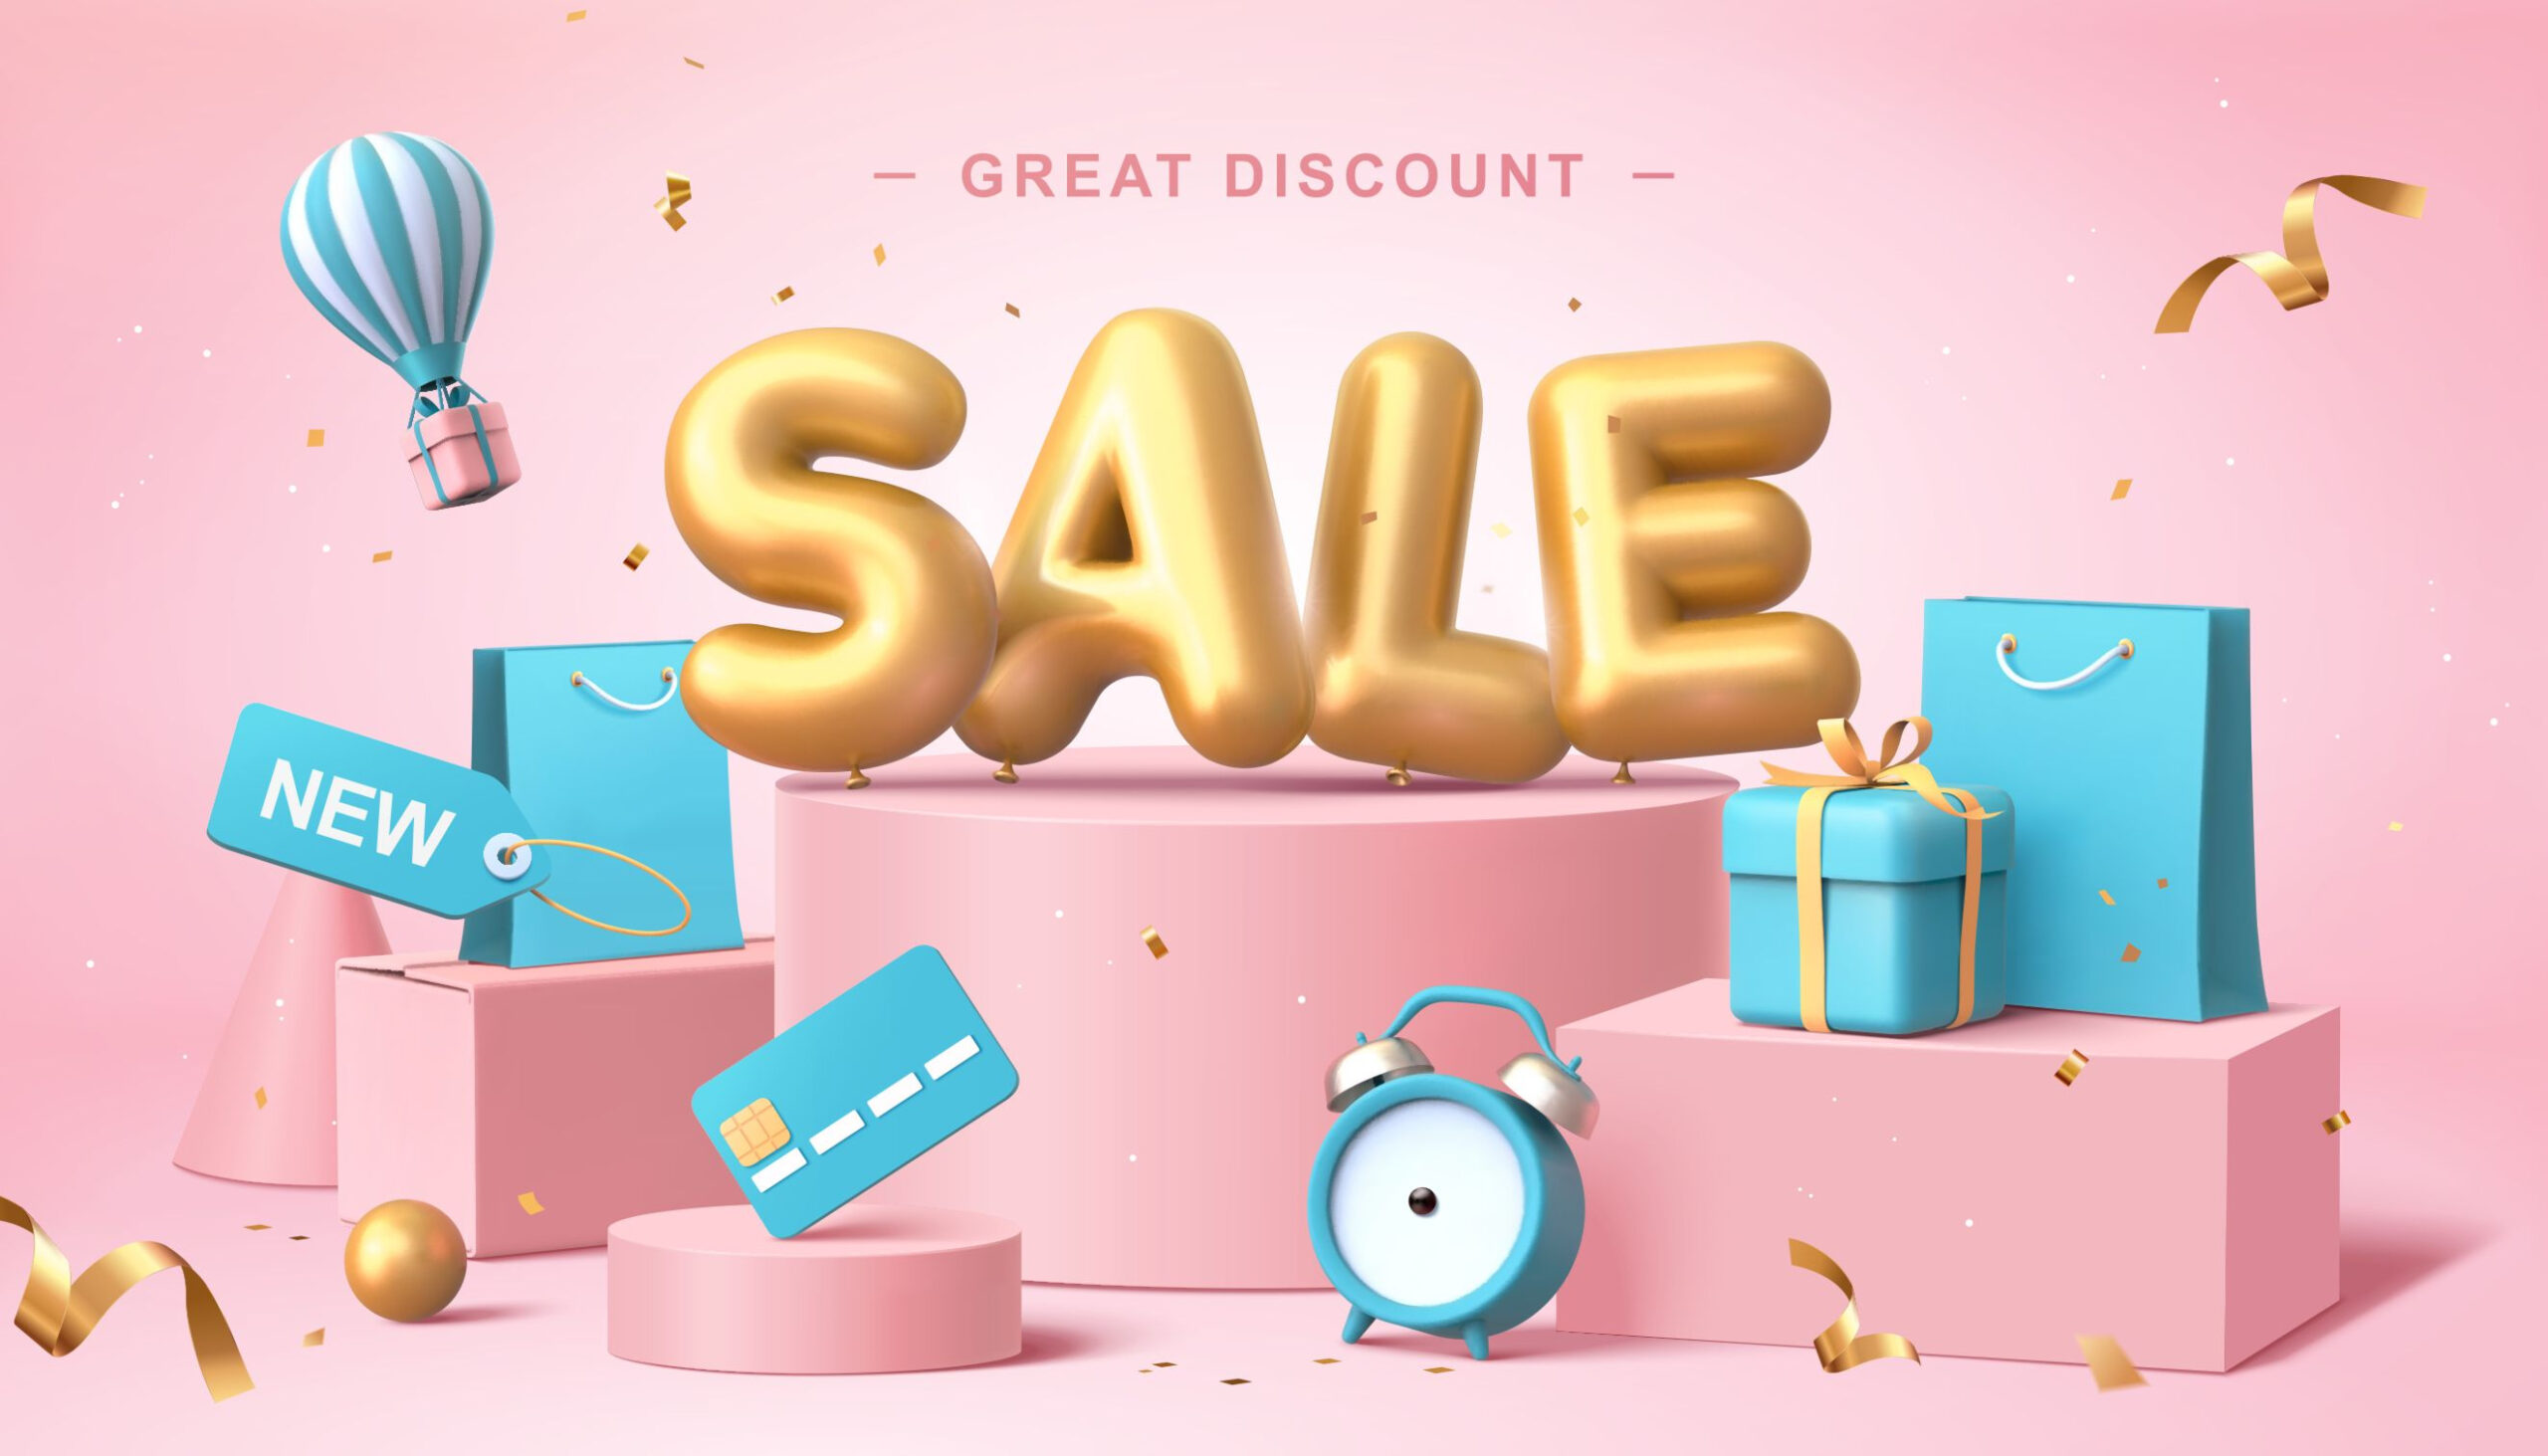 a "sale" logo with presents and a "sale" sign